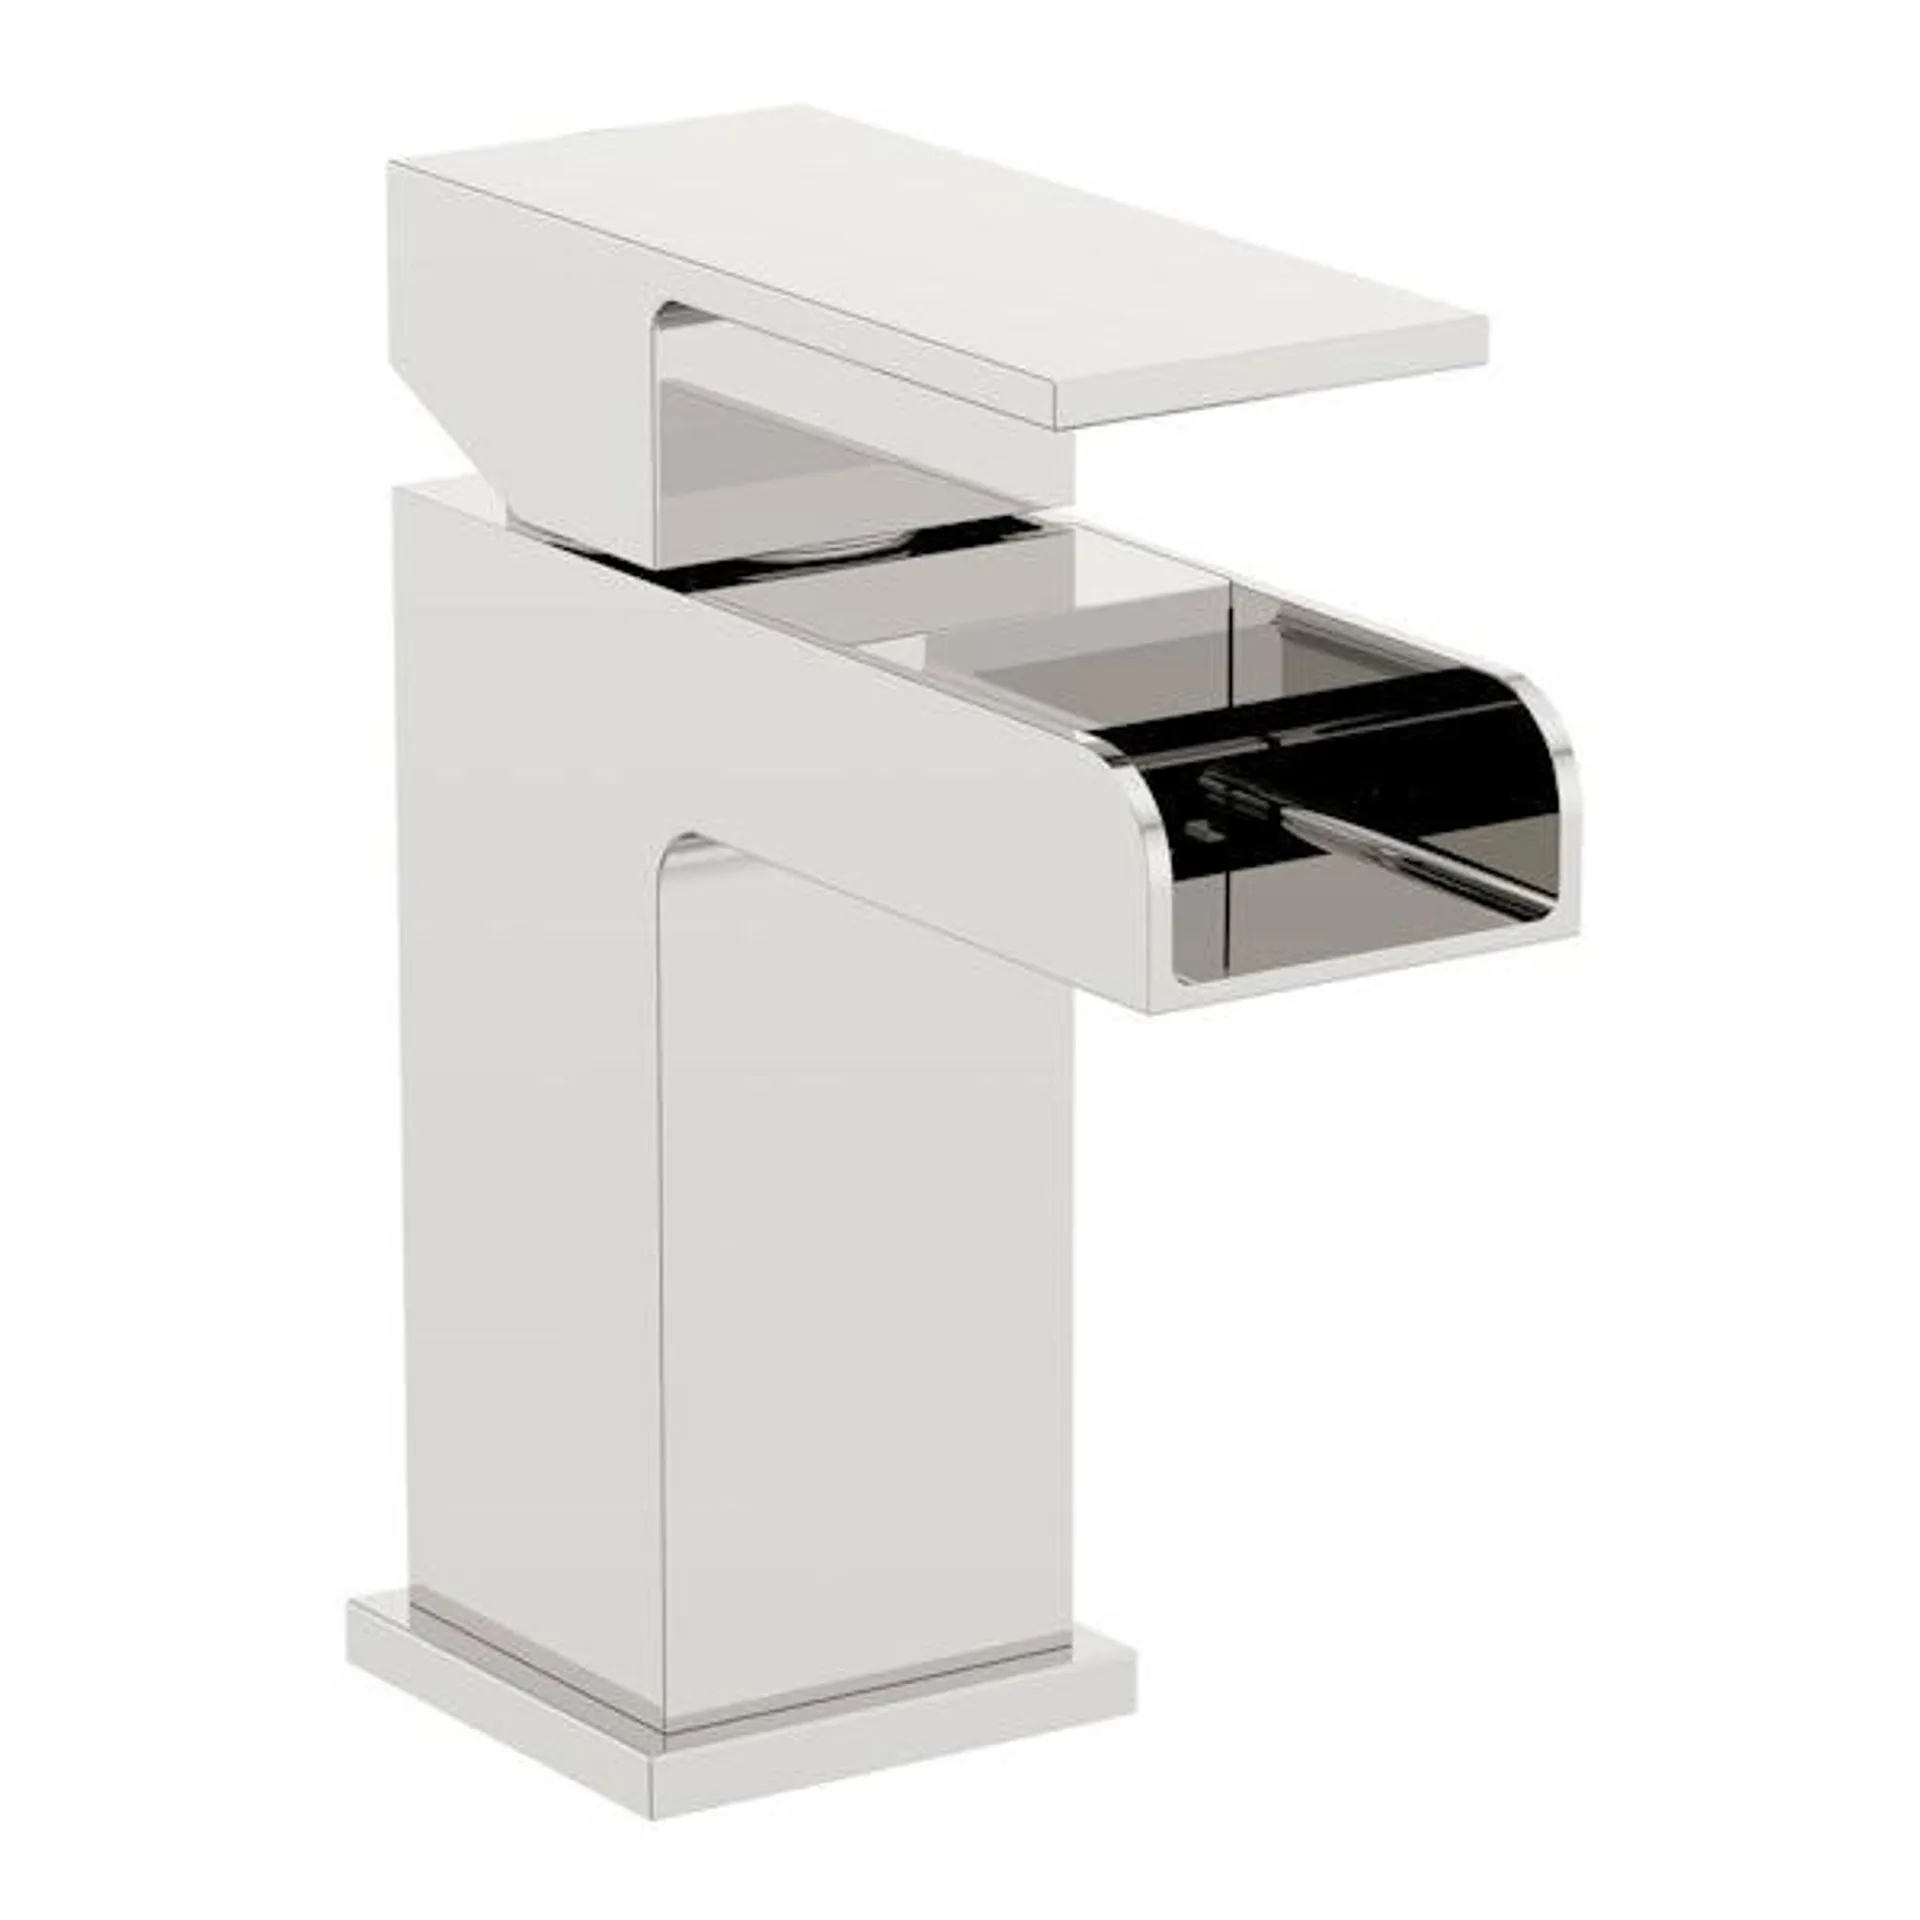 Orchard Derwent square waterfall basin mixer tap